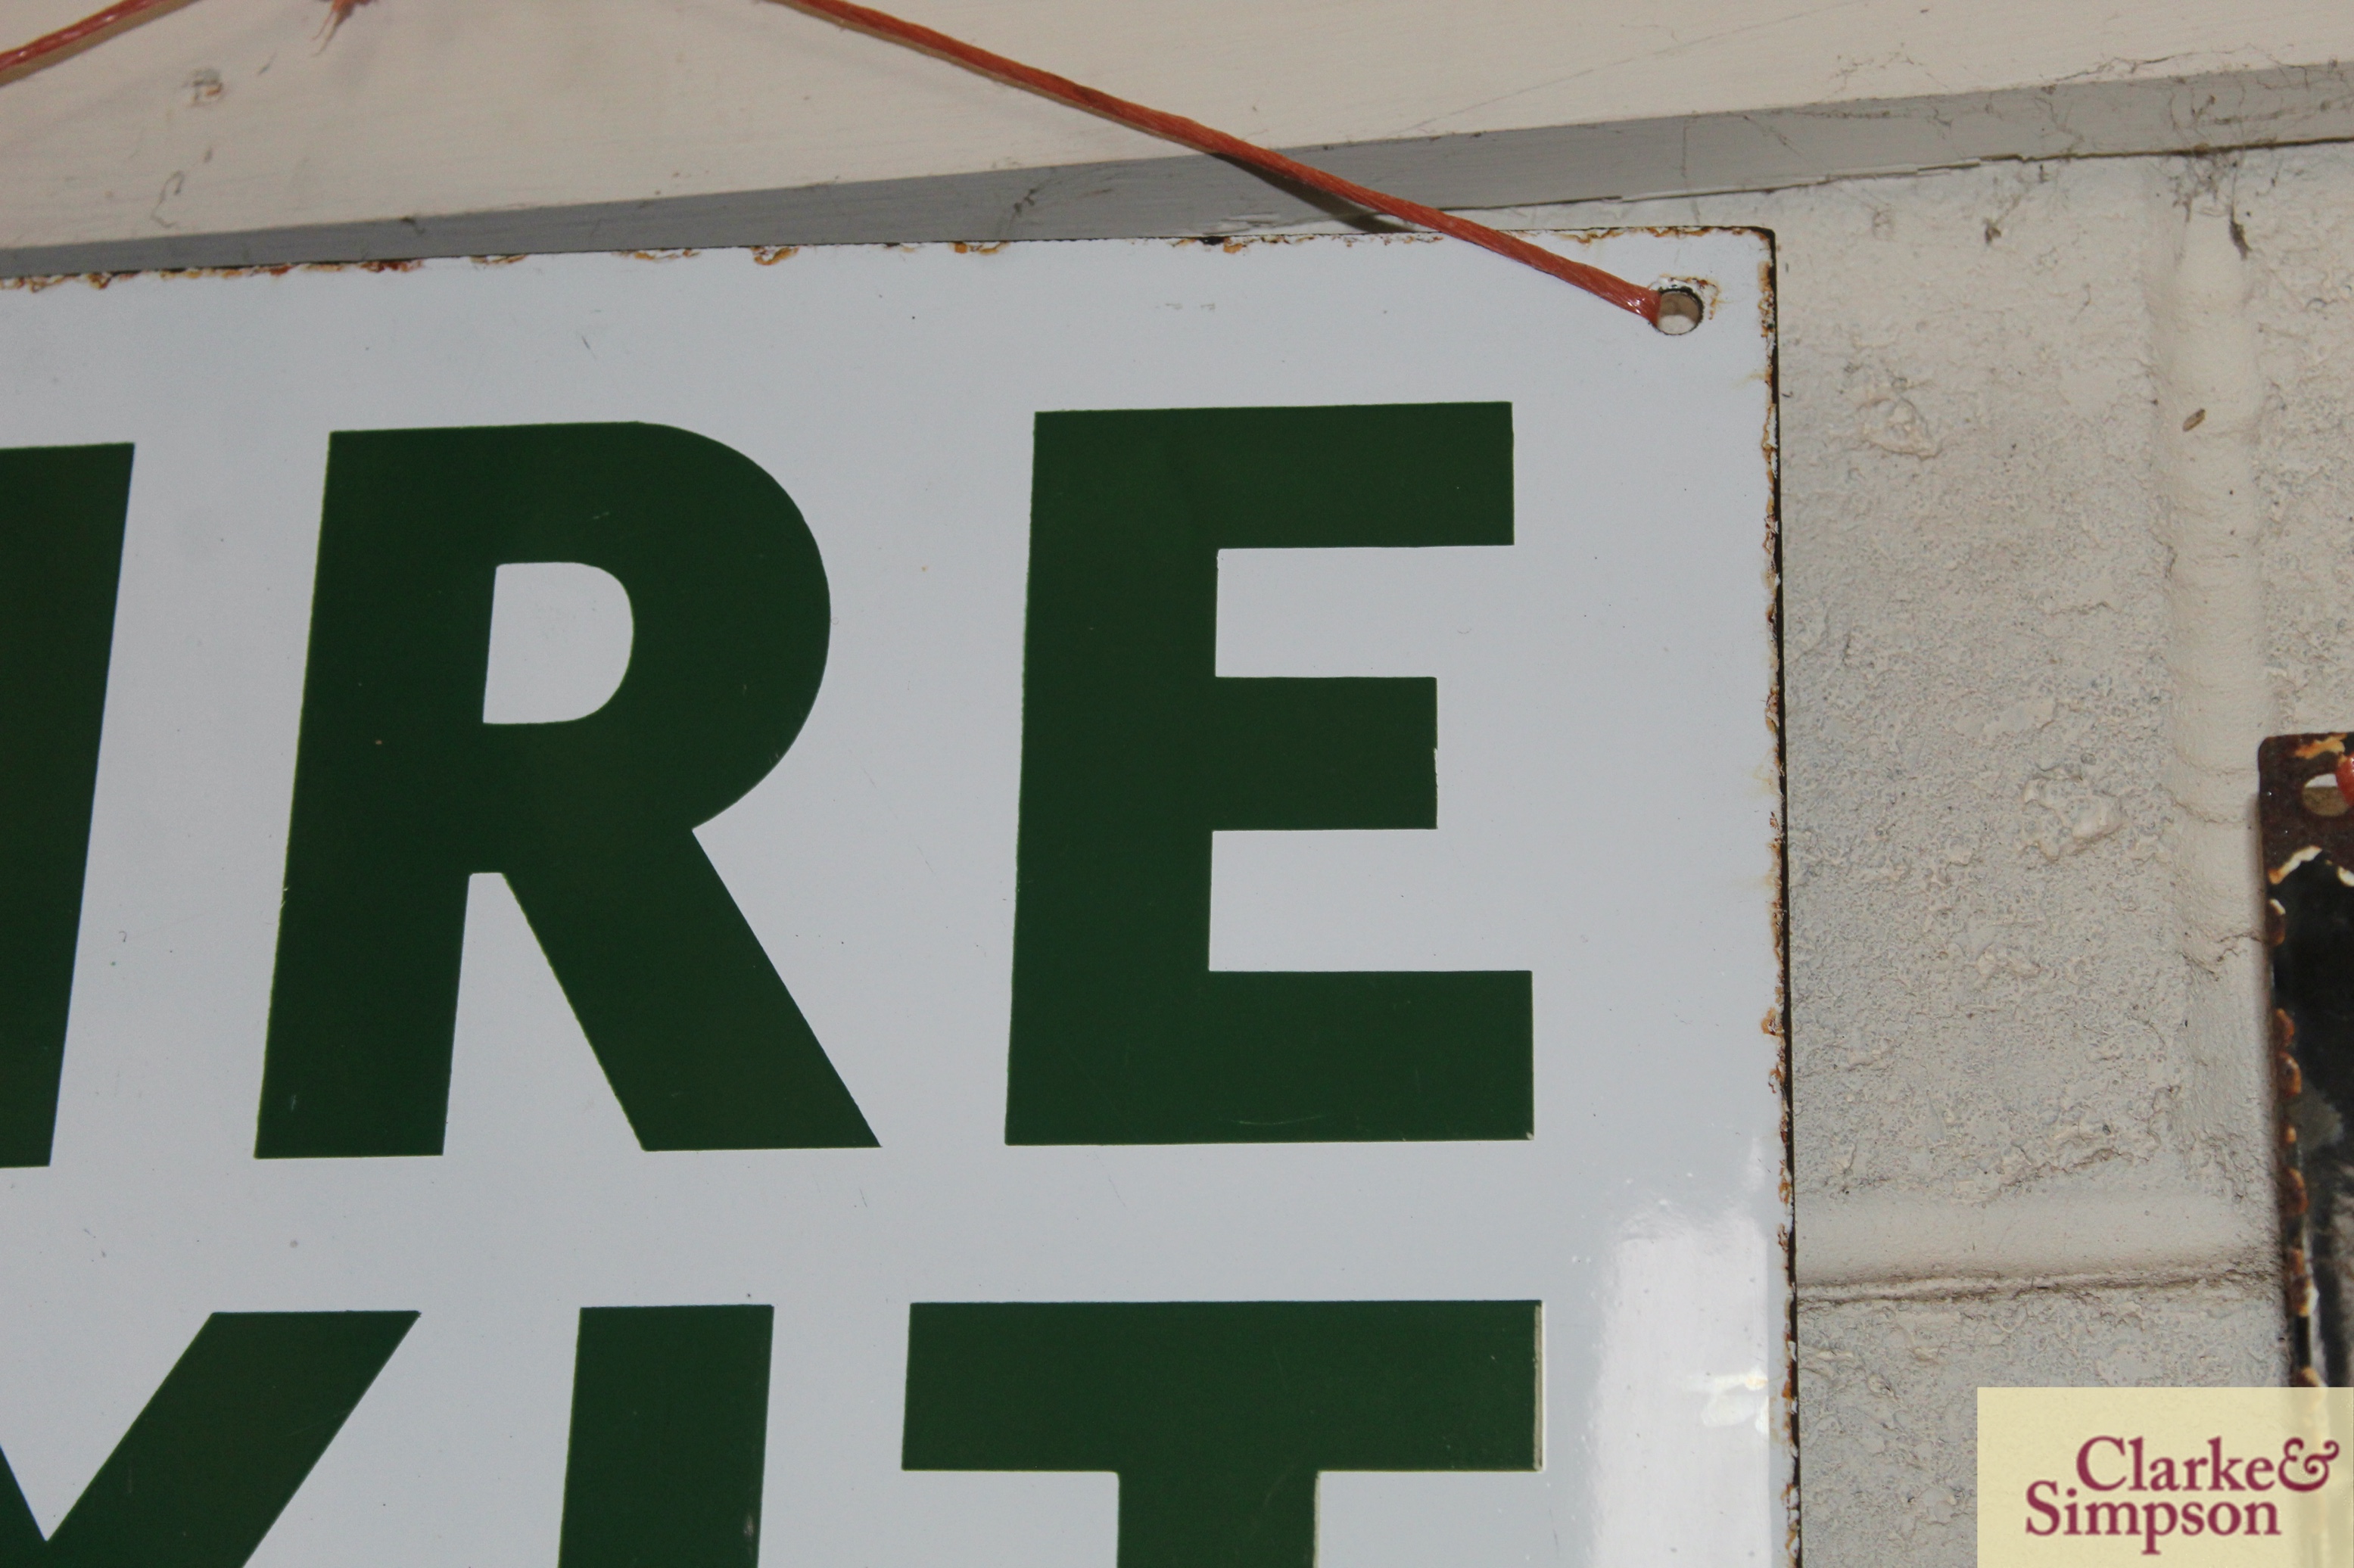 An enamel "Fire Exit" sign approx. 12" x 14" - Image 3 of 5